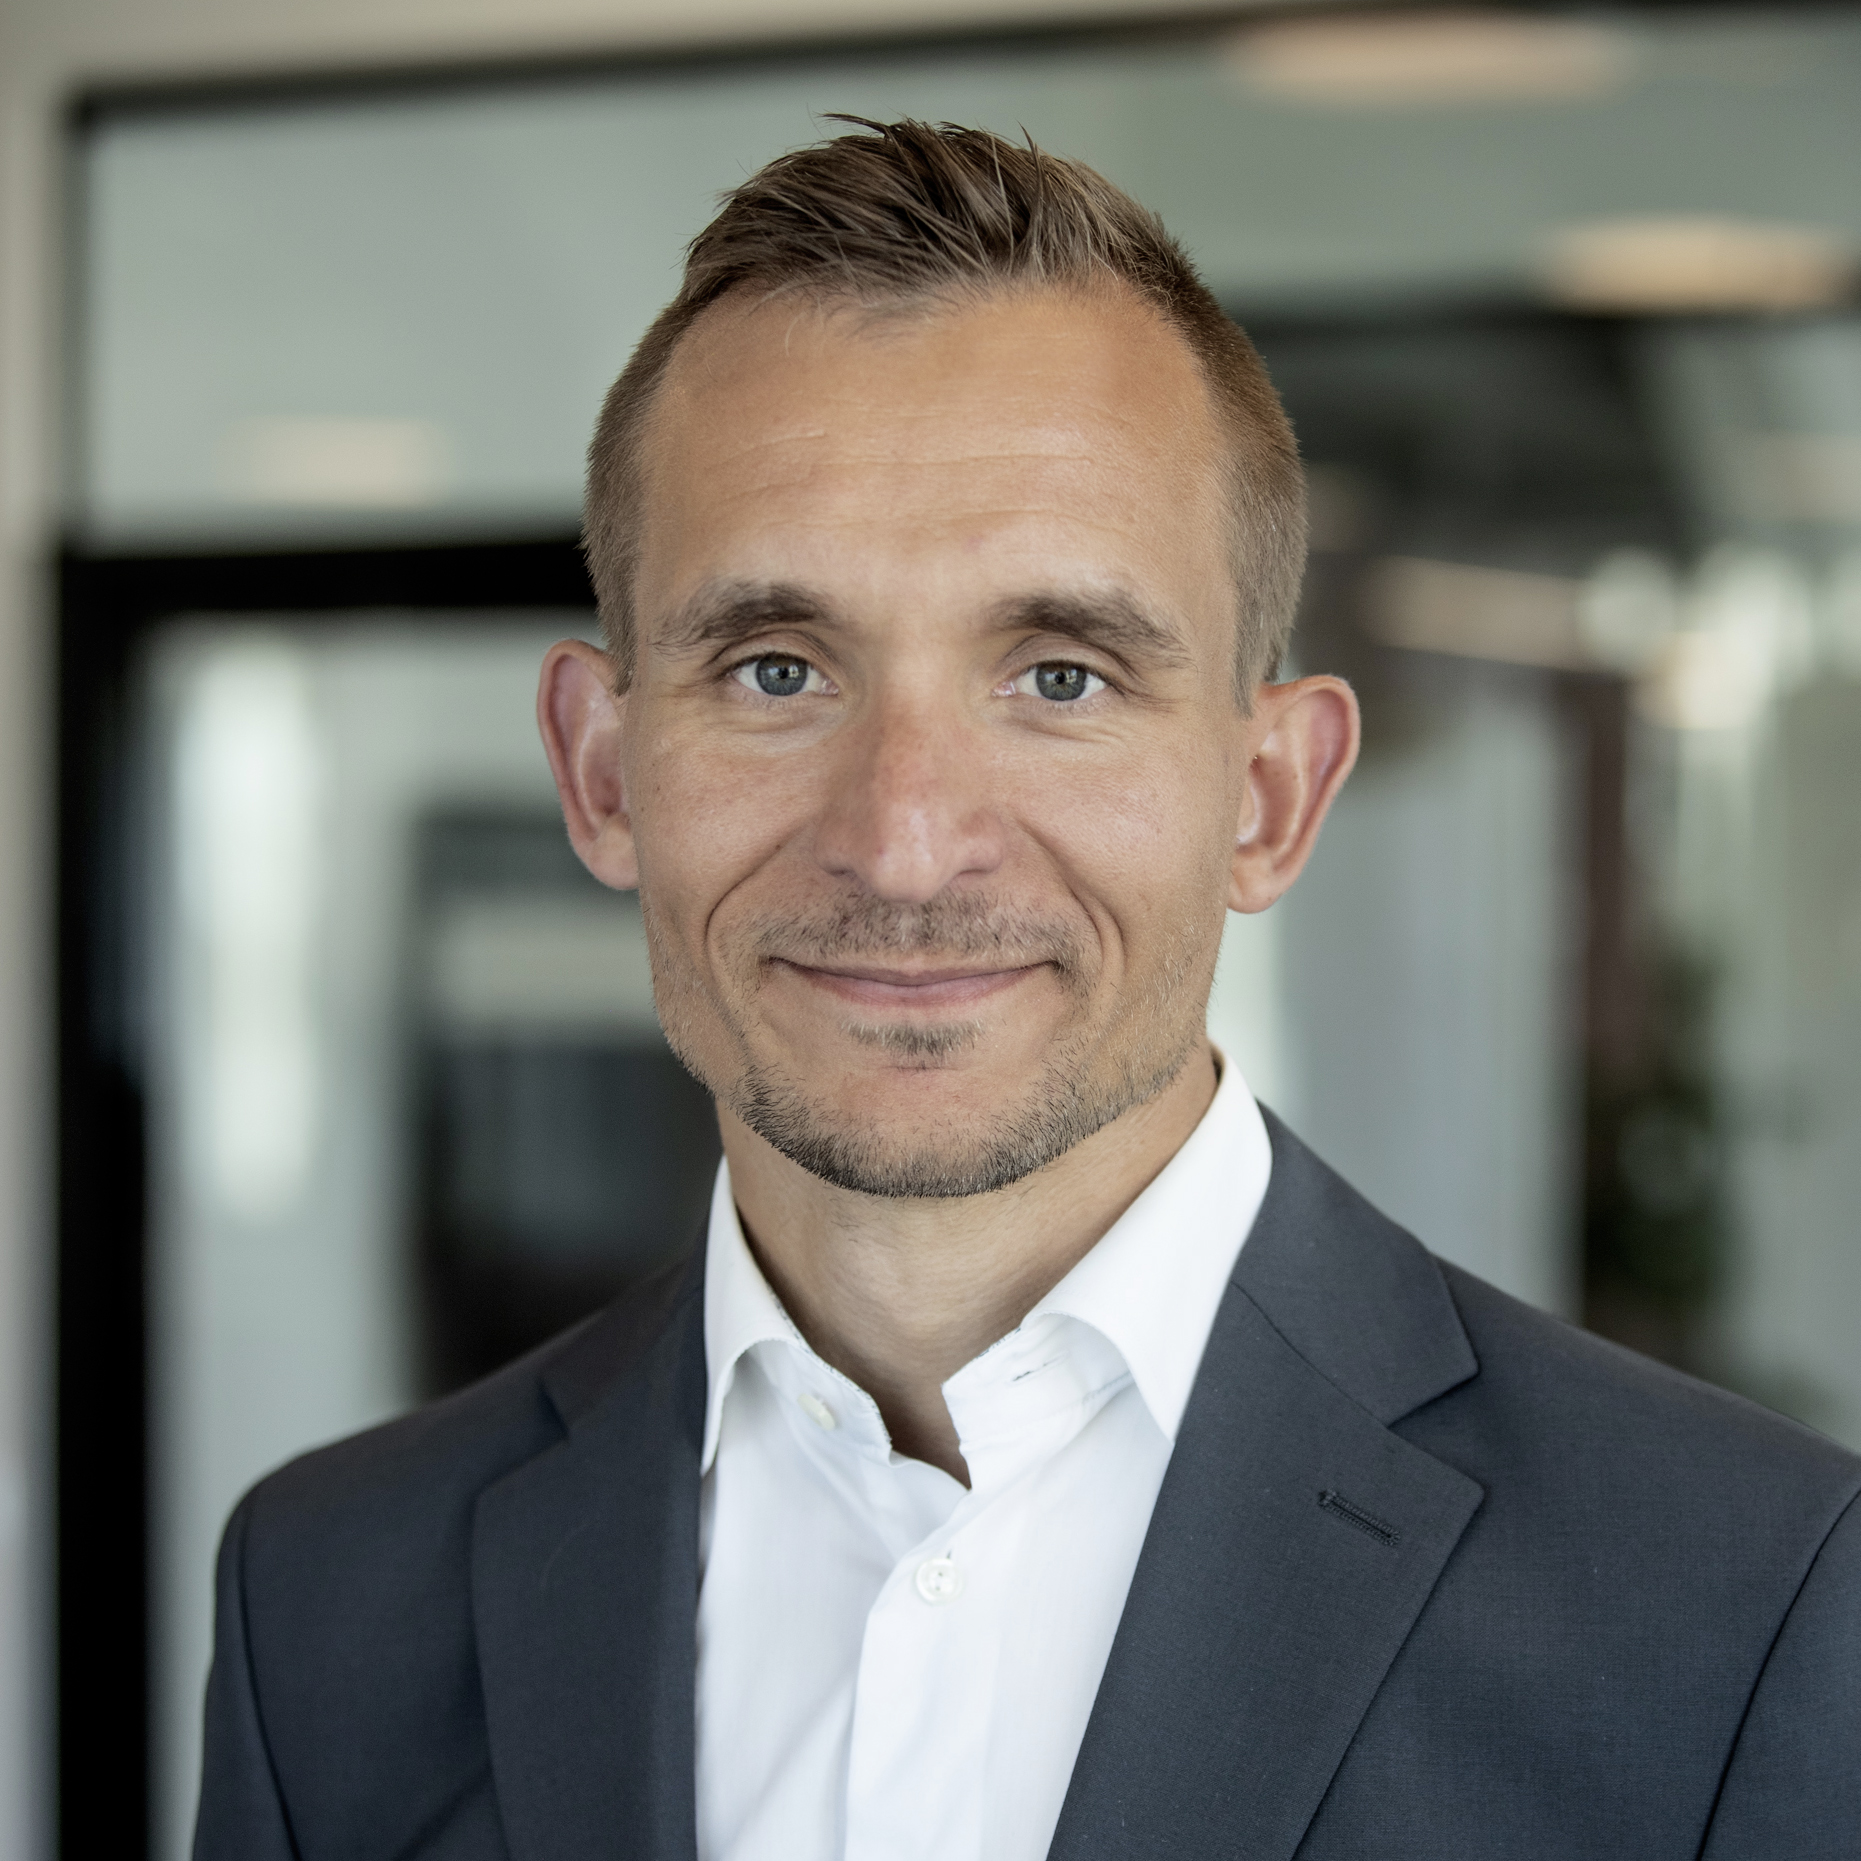 Bjørn Büchmann-Slorup to drive commercial excellence in the financial services sector in the Nordics